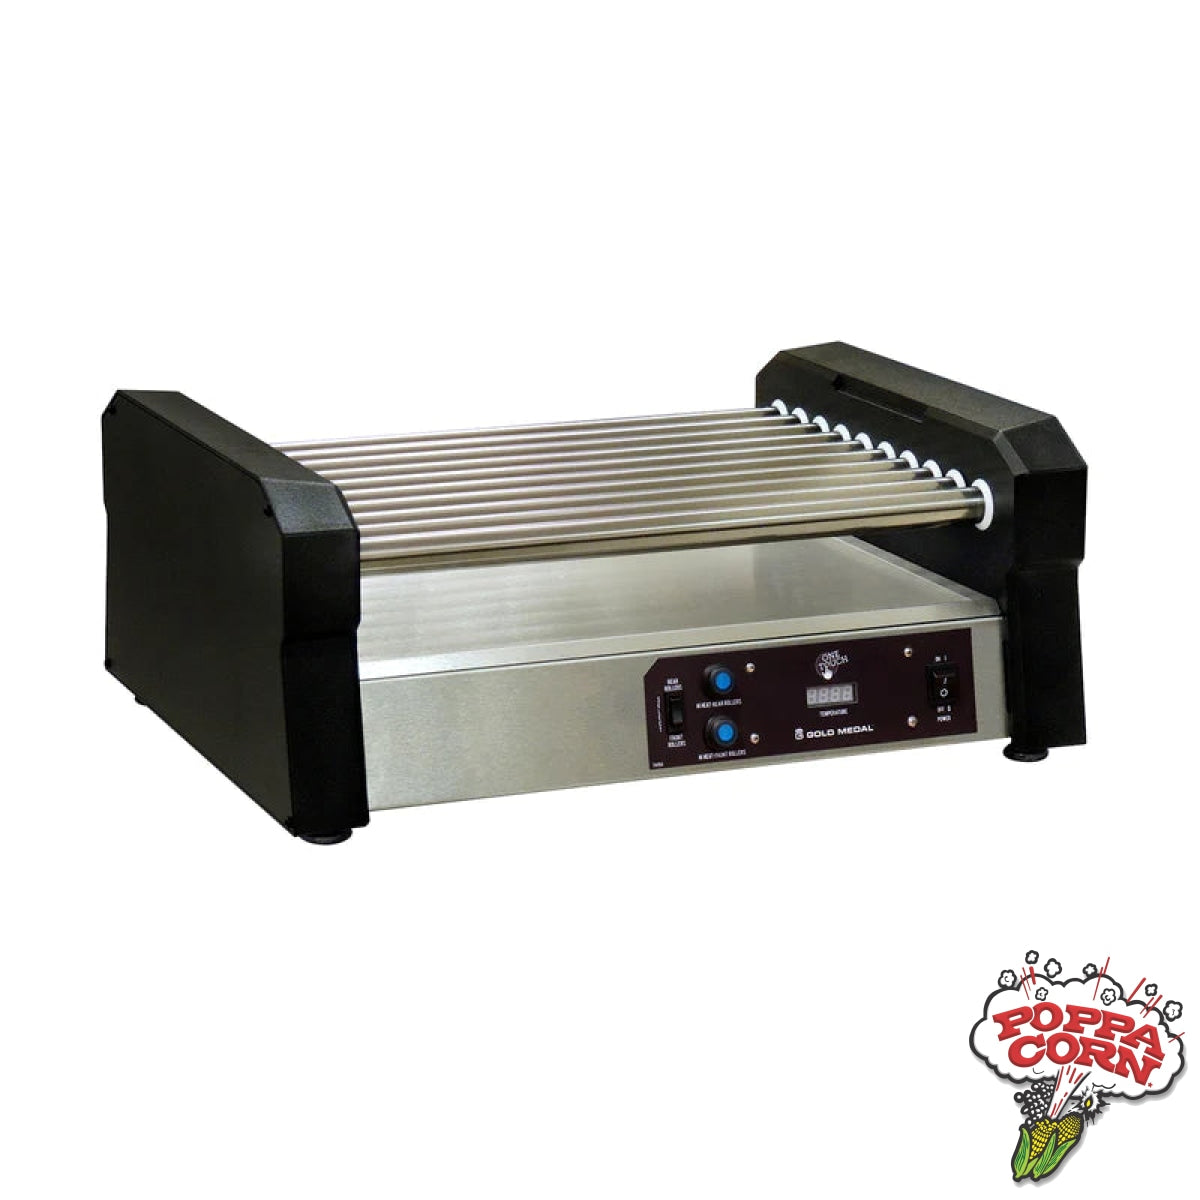 One Touch Hot Diggity Pro S Roller Grill - Stainless Steel Rollers - GM8551-00-010 - Poppa Corn Corp